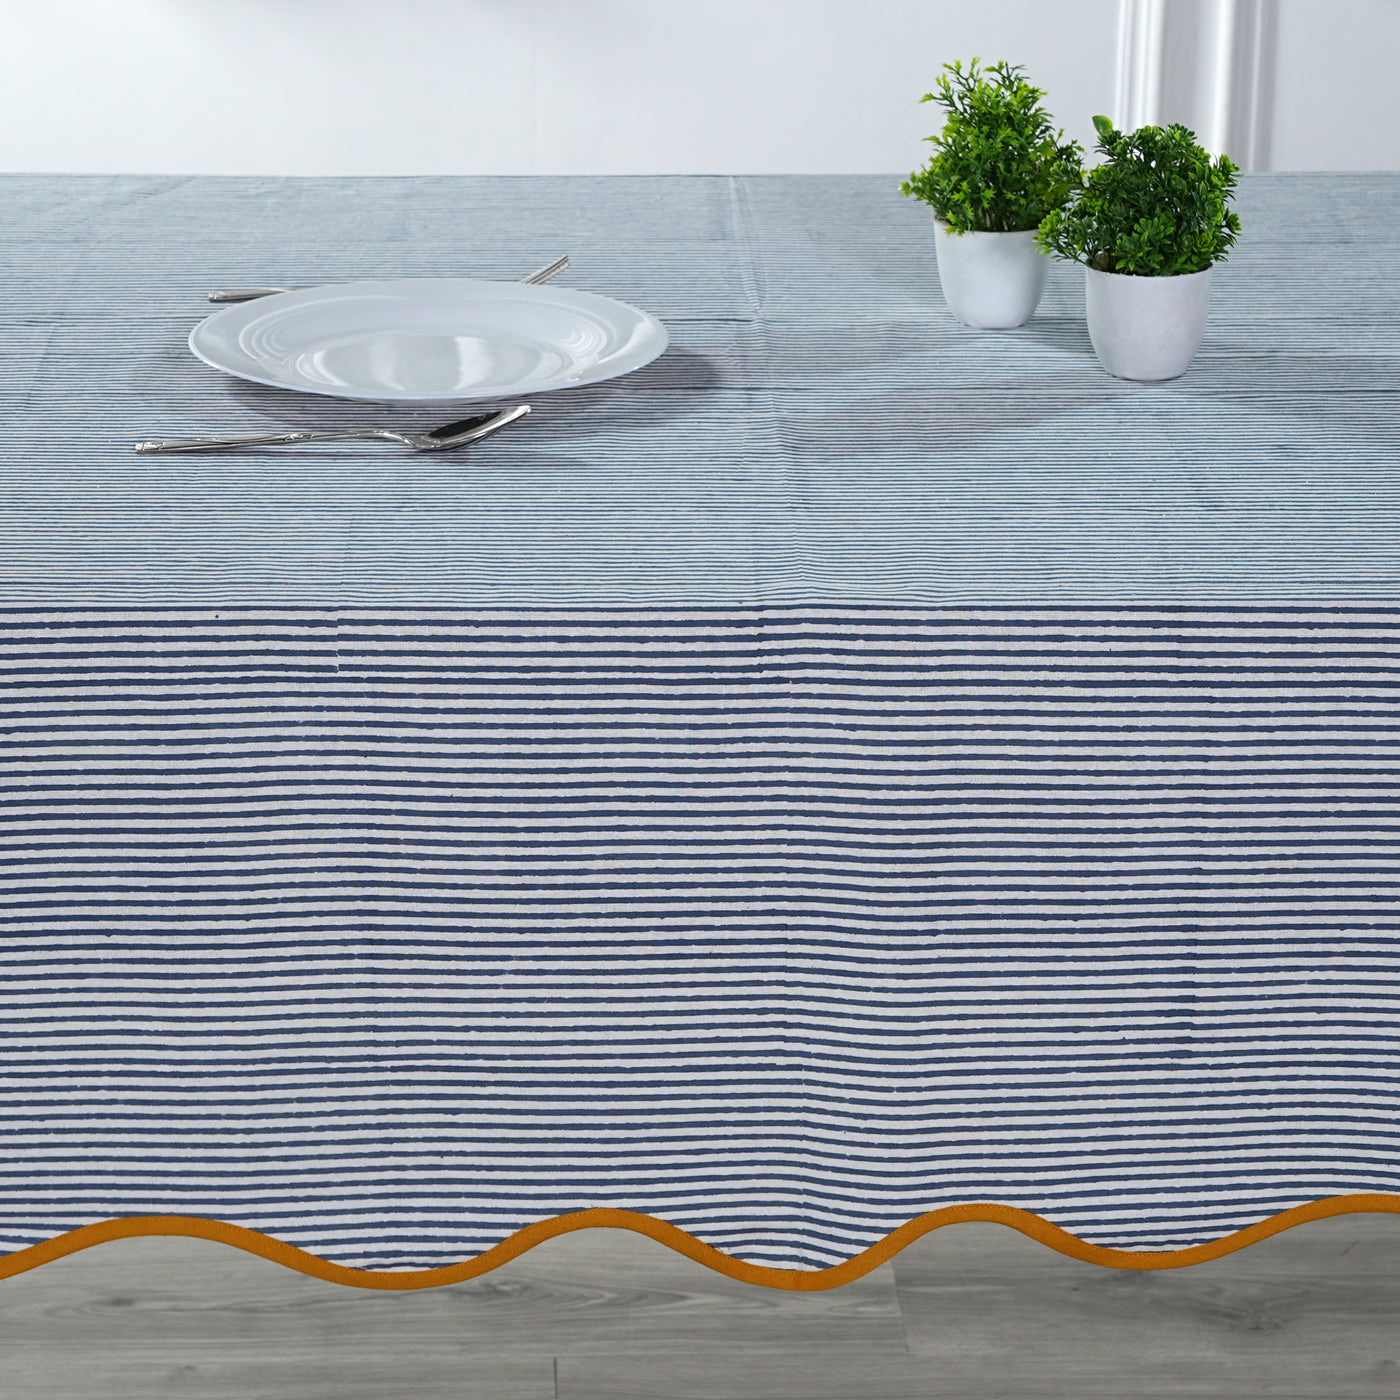 Fabricrush Blue Stripes with Yellow Piping Indian Hand Block Printed Pure Cotton Tablecloth for Farmhouse Wedding Restaurant Home Decor Garden Bar Gift